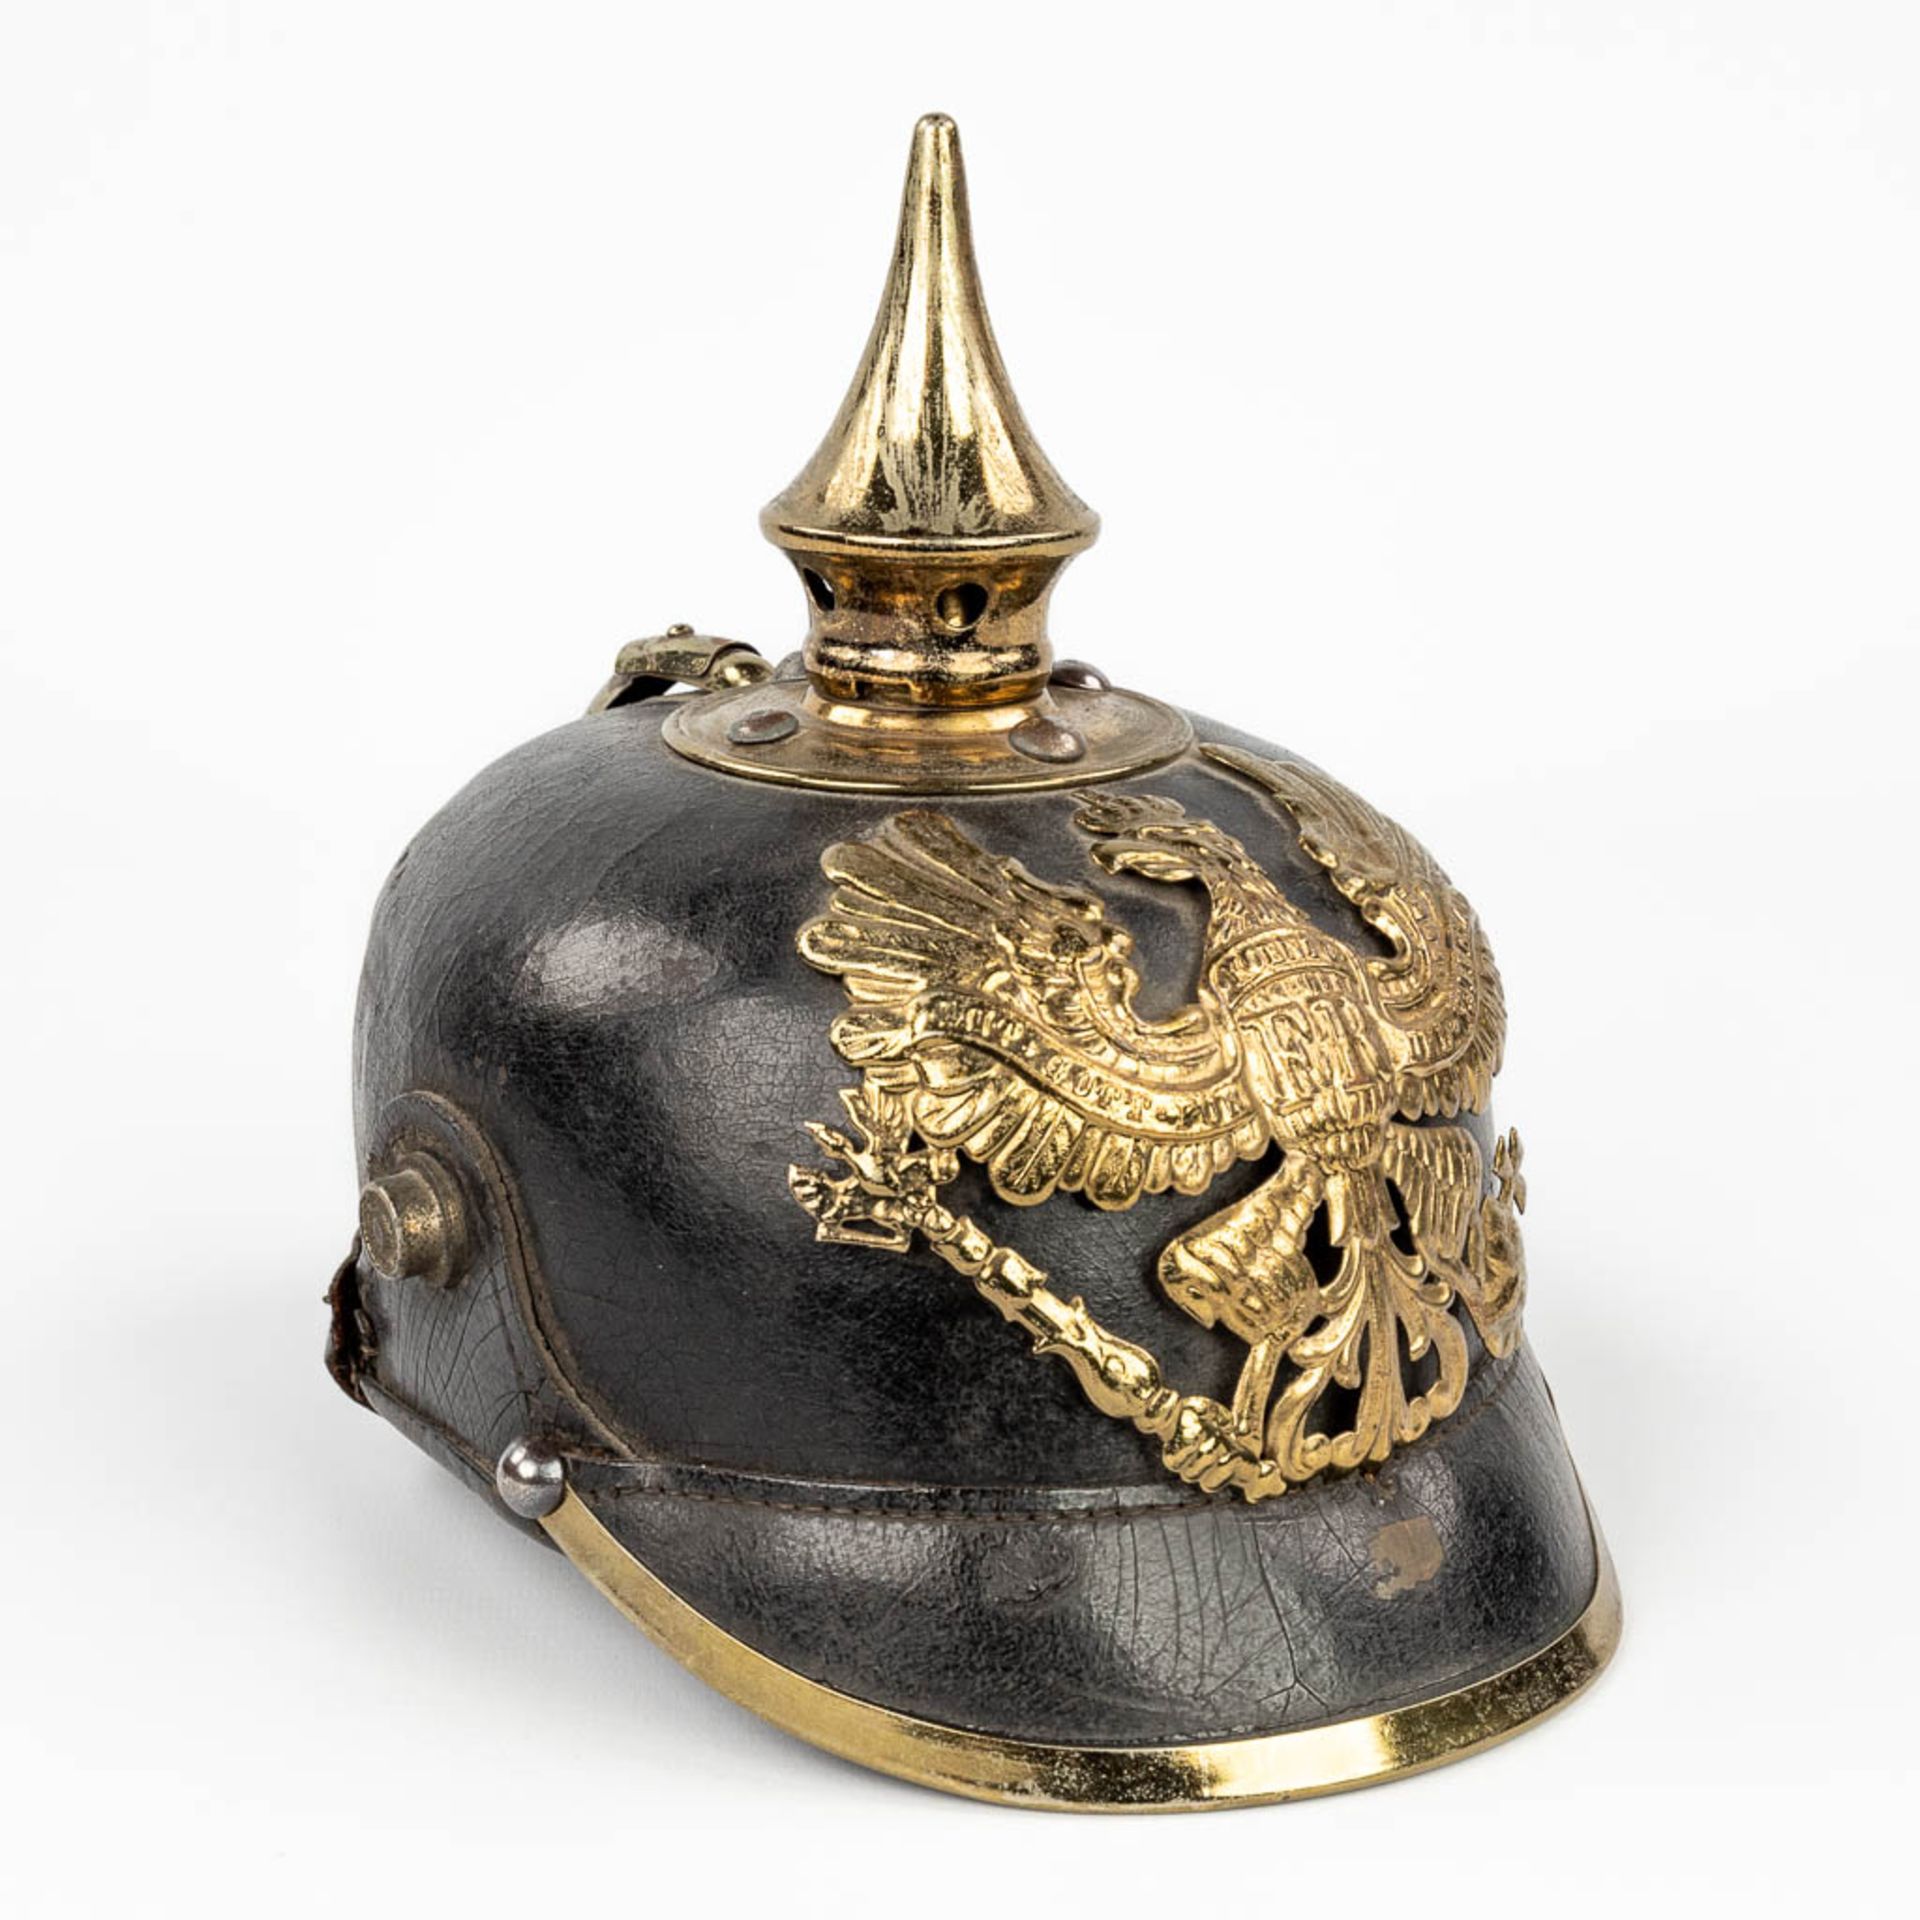 An antique German 'Pickelhaube' decorated with an eagle. Dating 1914-1918. (L:25 x W:18 x H:21 cm) - Bild 6 aus 17